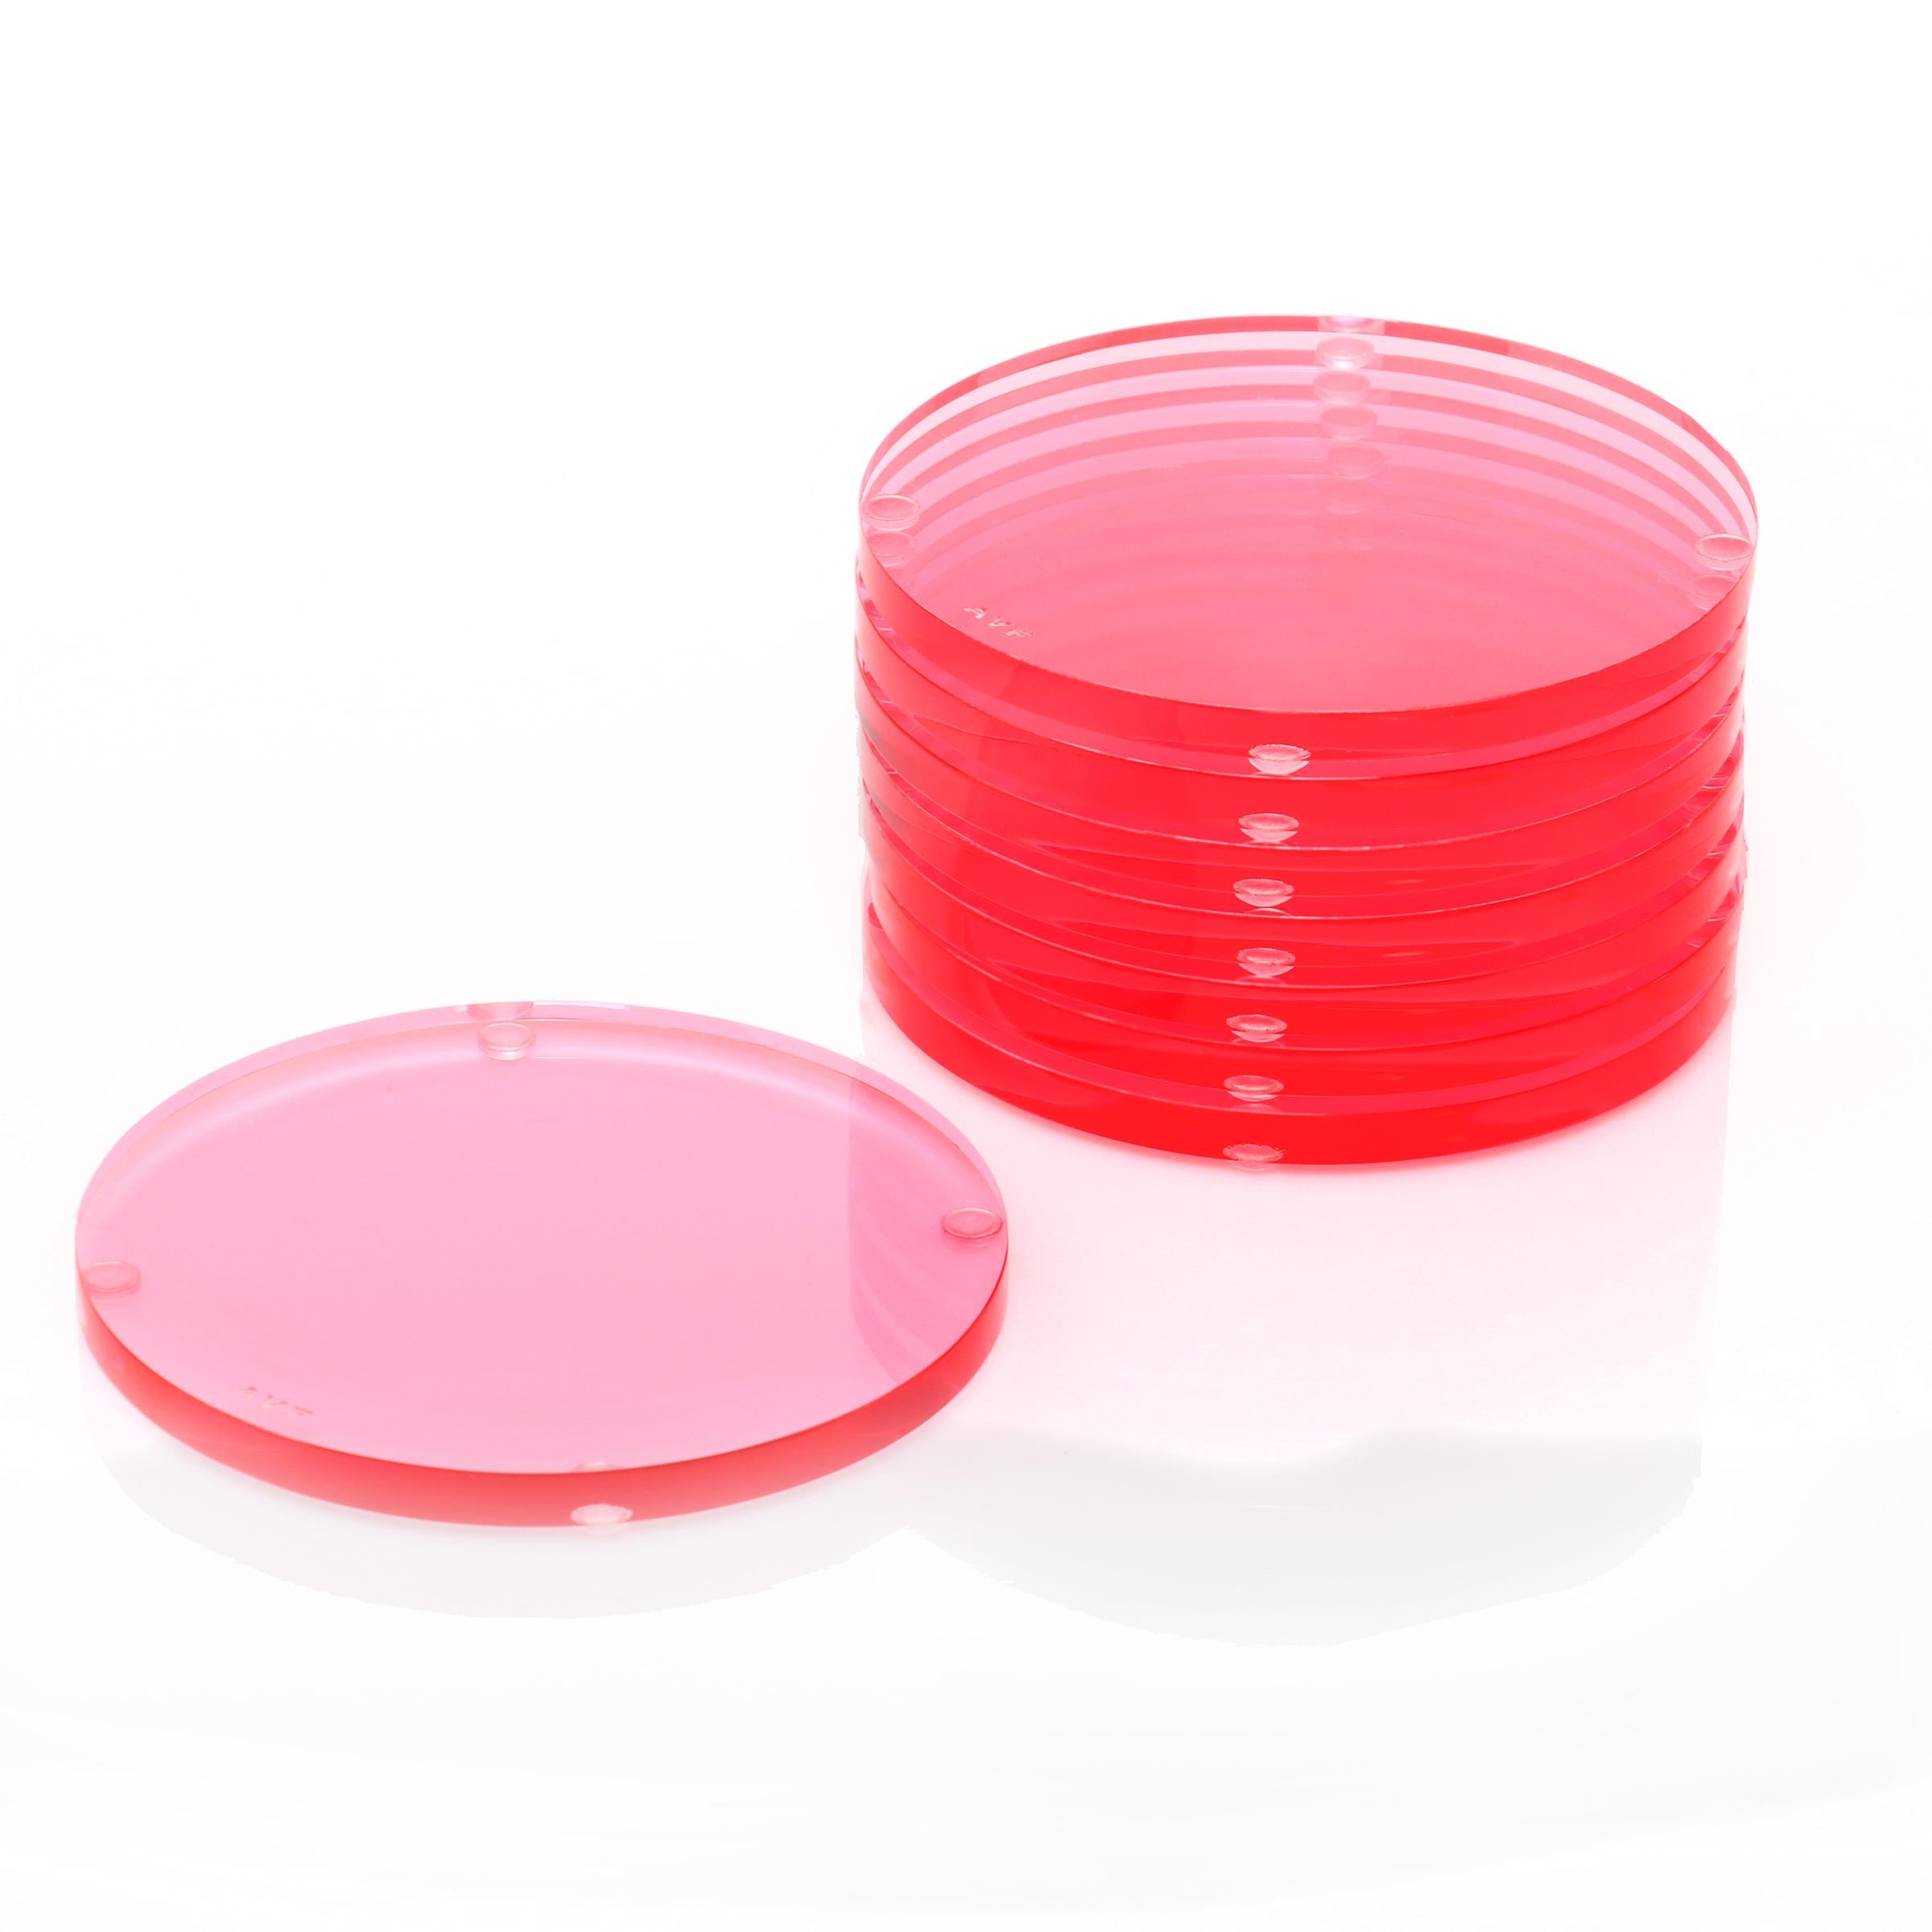 Stack of red Petri dishes with one lid separated in foreground.